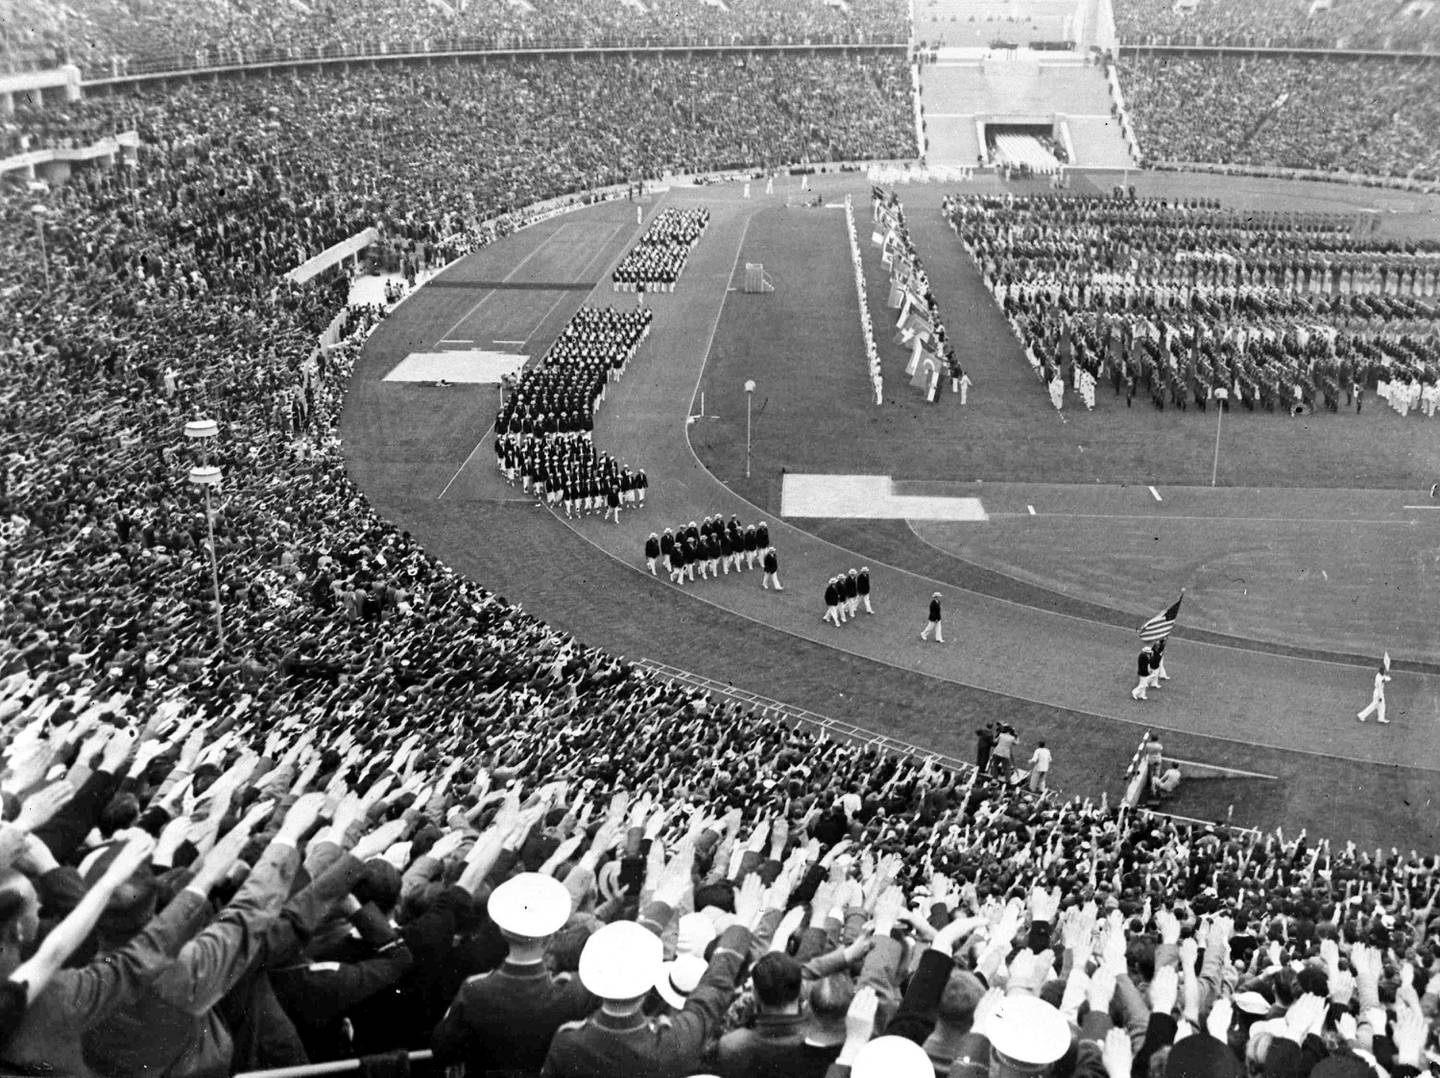 The American team of athletes parade around the Olympic Stadium, in Berlin, Germany, Aug. 1, 1936, during the opening ceremony of the XI Olympic Games. (AP Photo)